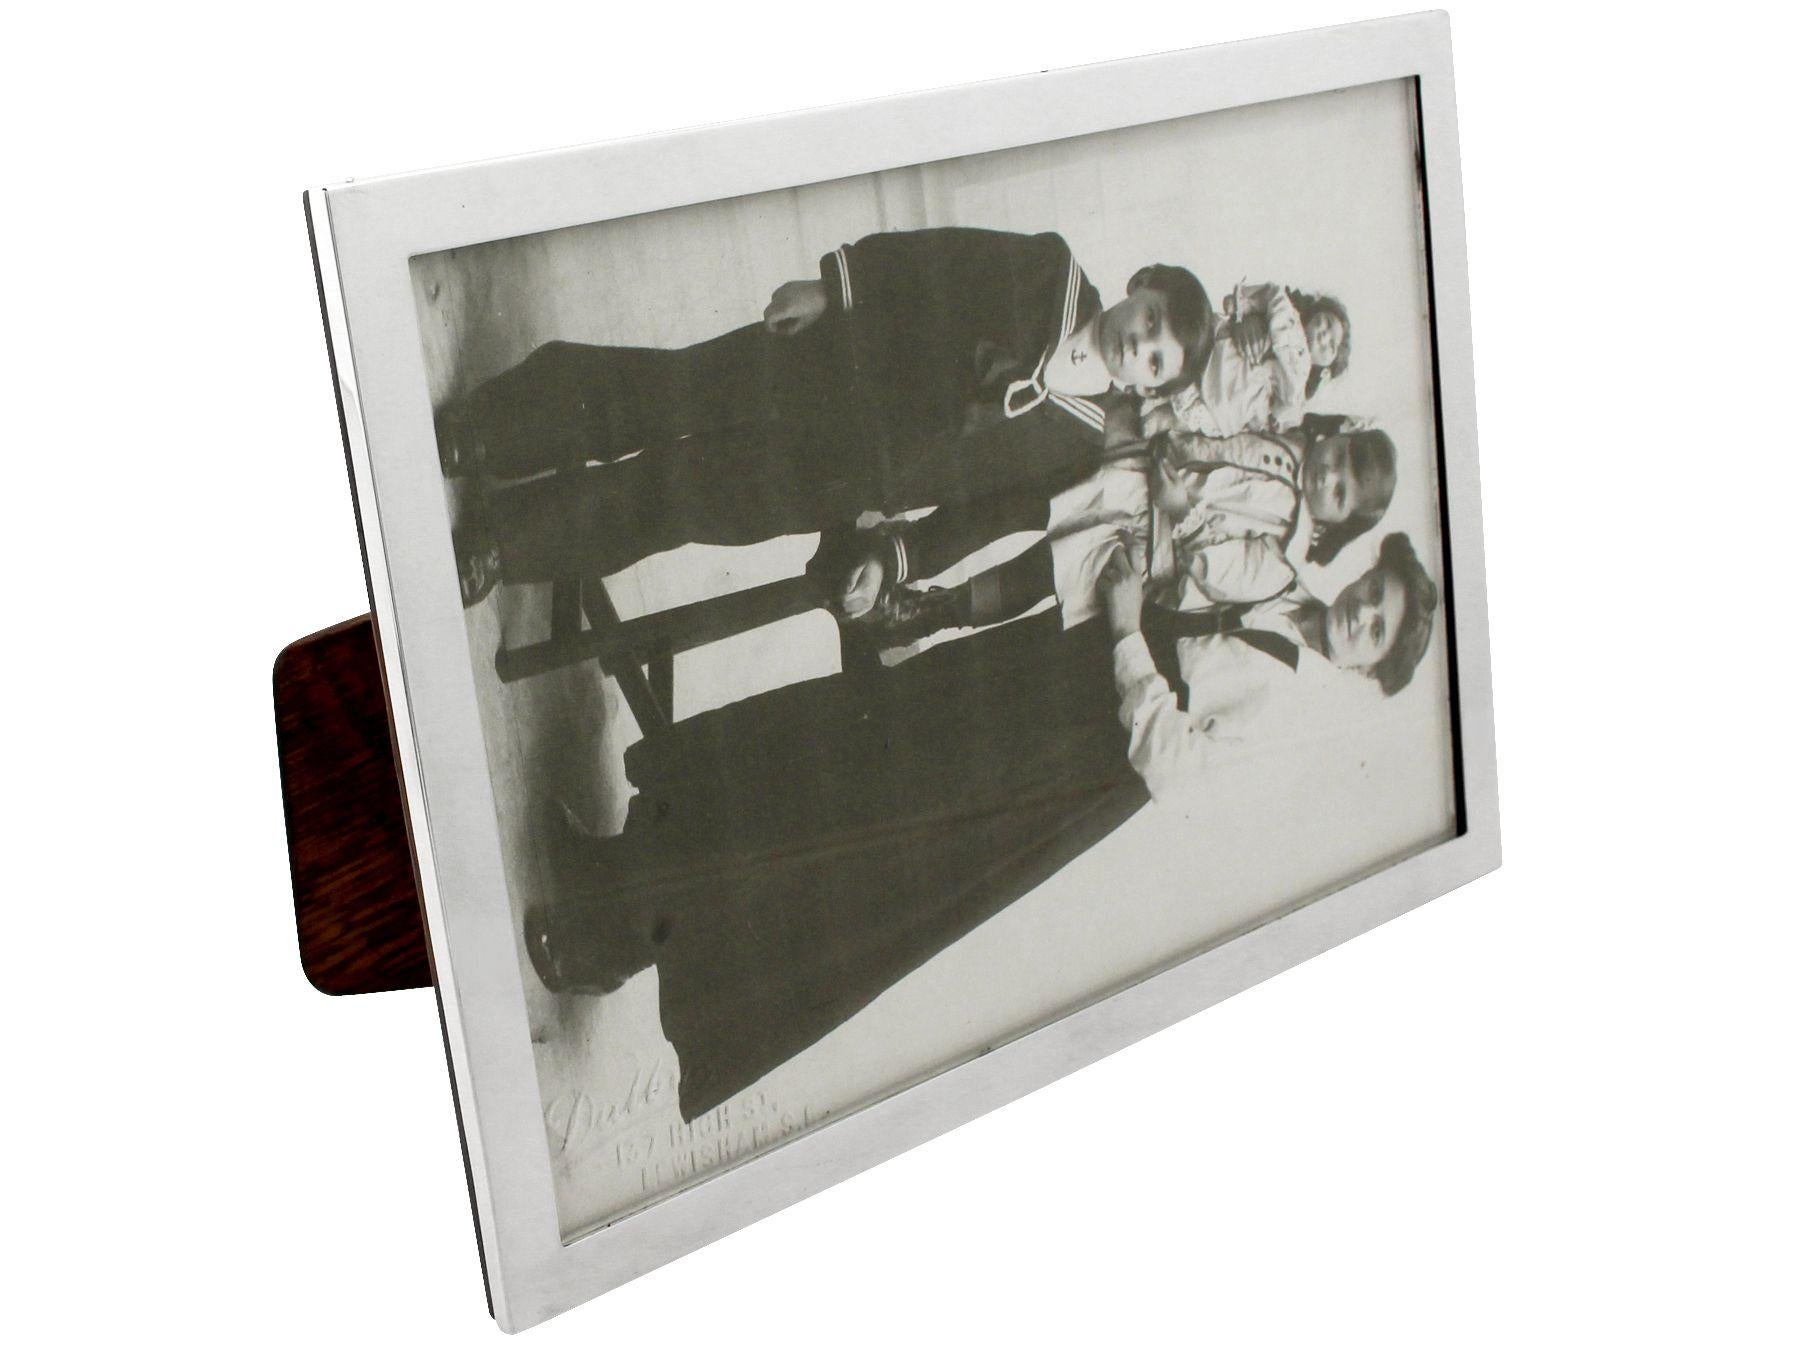 A fine and impressive, large antique George V English sterling silver photograph frame; an addition to our collection of ornamental silverware.

This fine antique sterling silver photo frame has a plain rectangular form.

The surface of this